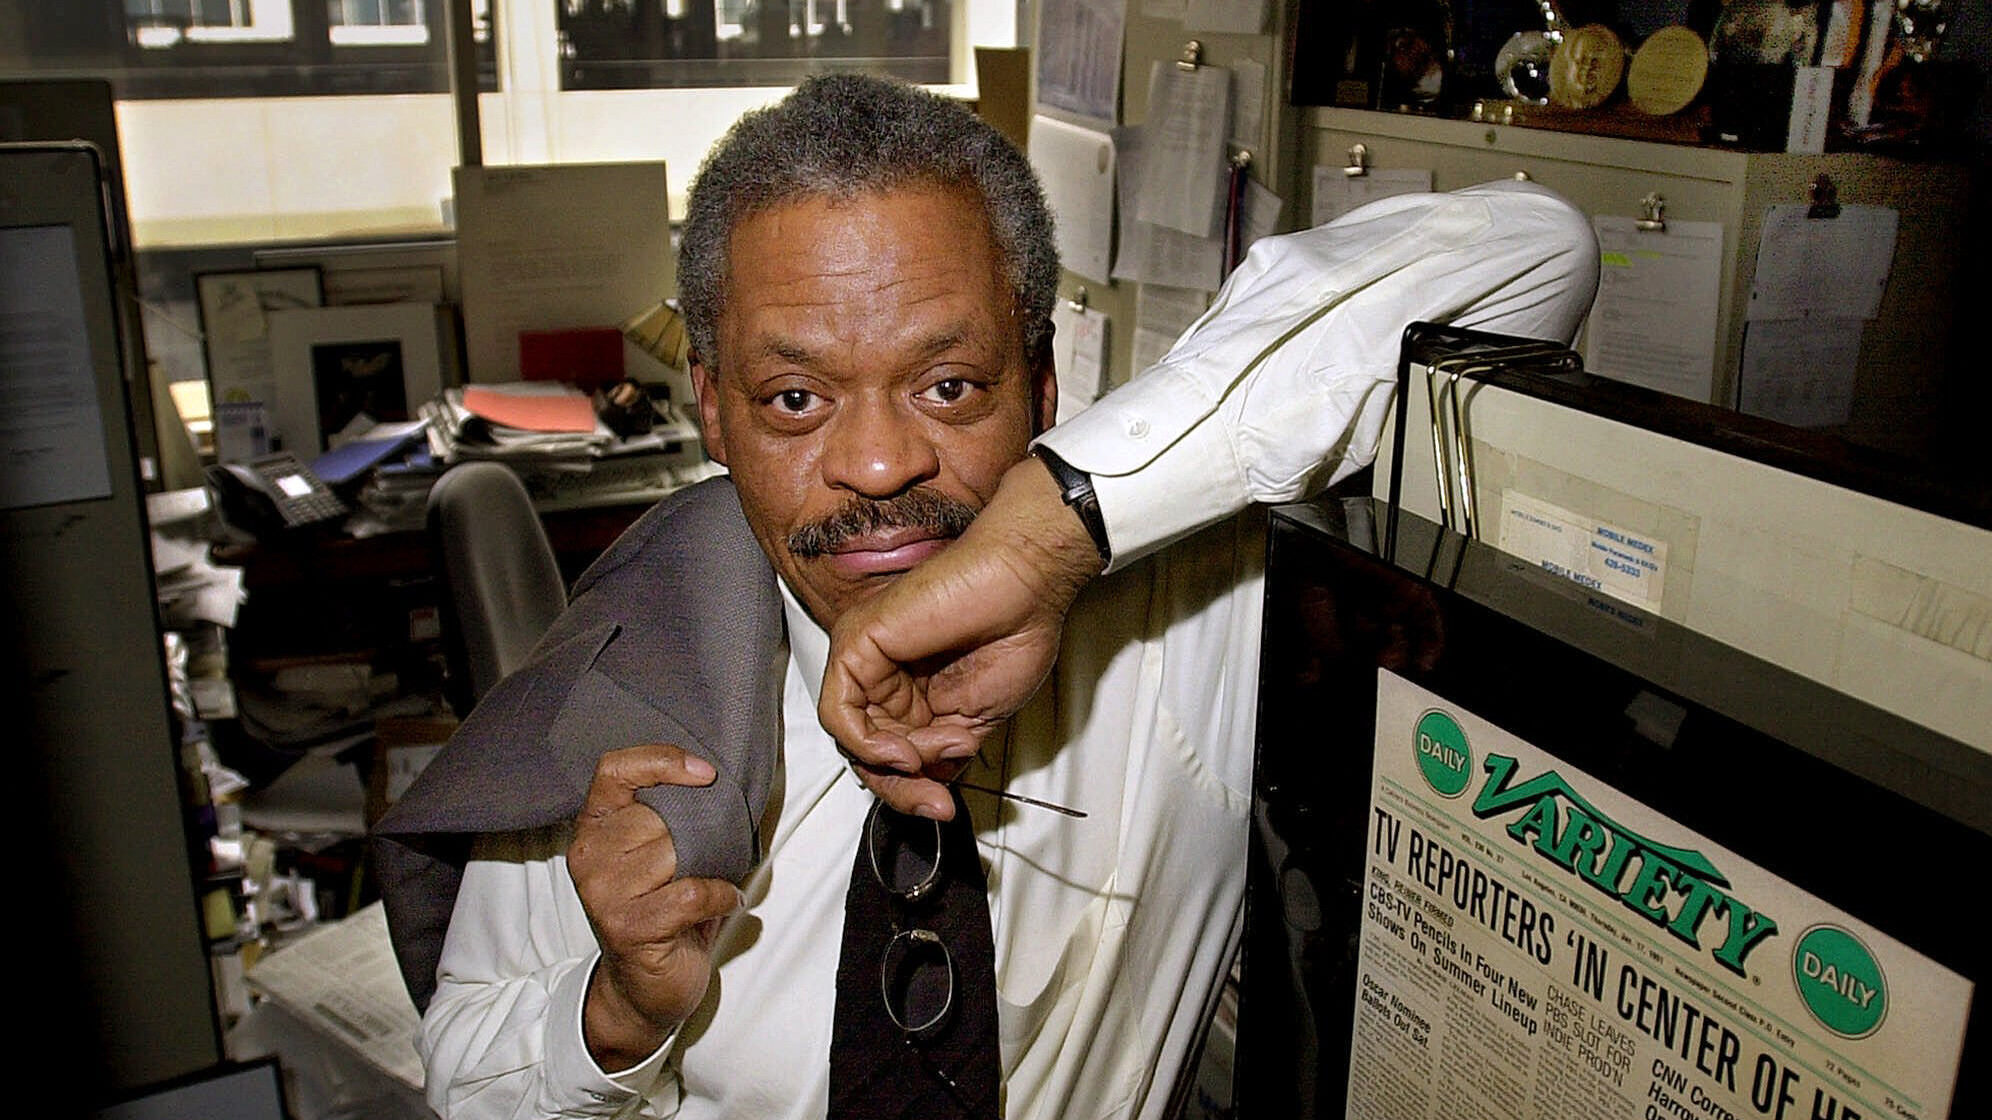 FILE - CNN anchor Bernard Shaw poses in his office at CNN's Washington bureau on Feb. 15, 2001. Shaw, who was CNN's original chief anchor when the network started in 1980, died of pneumonia in Washington on Wednesday, Sept. 7, 2022, according to Tom Johnson, the network's former chief executive. Shaw was 82. (AP Photo/Alex Brandon, File)